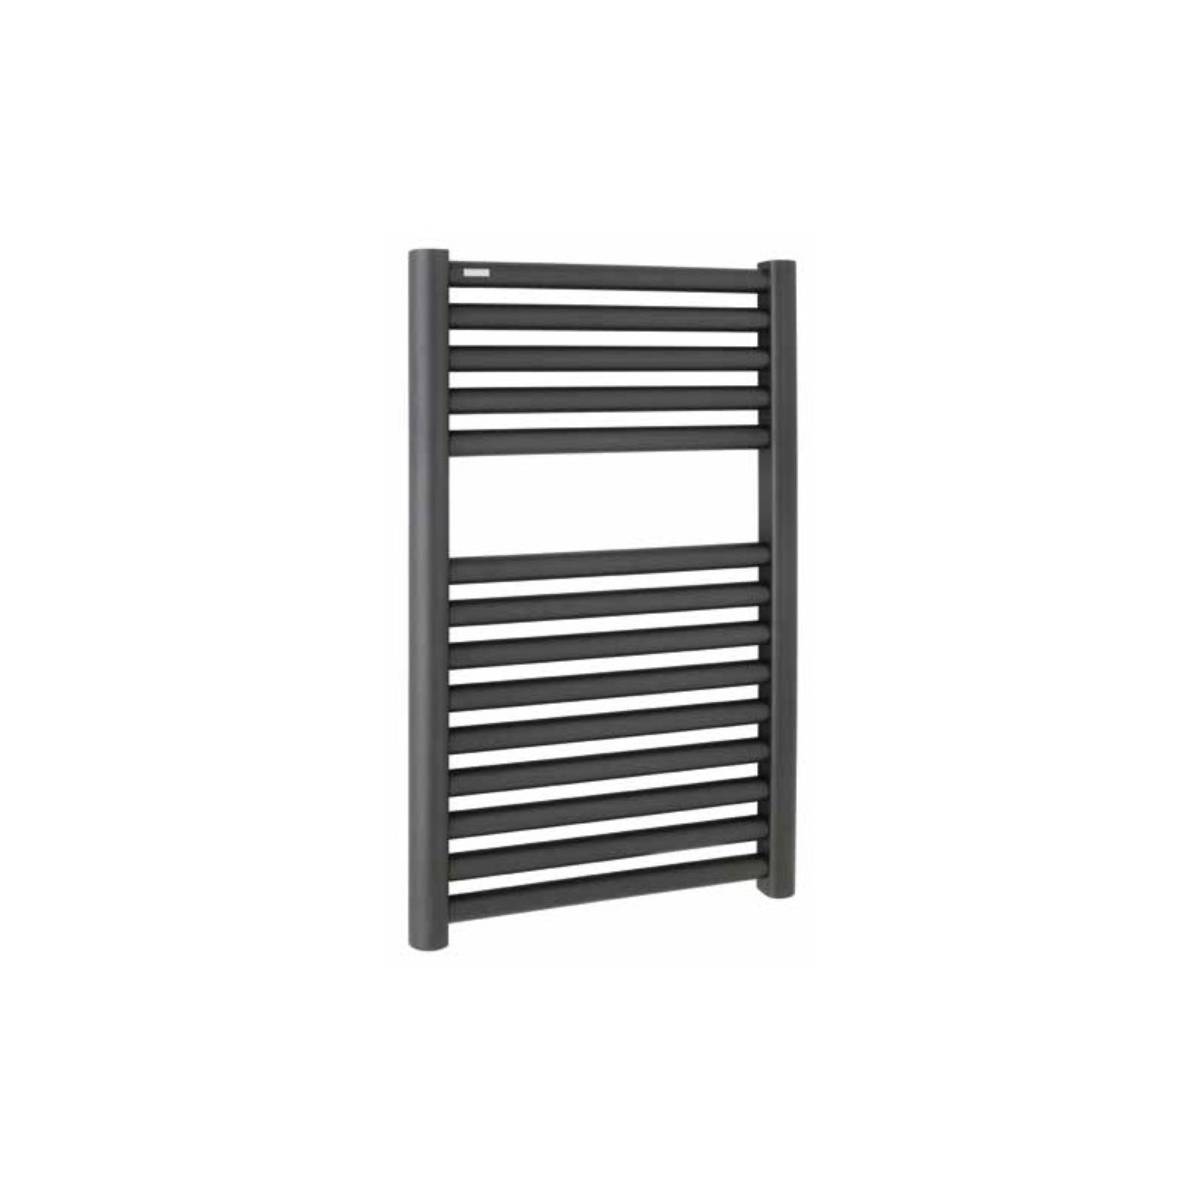 Wendover 600 x 600mm Straight Heated Towel Rail - Anthracite (12426)